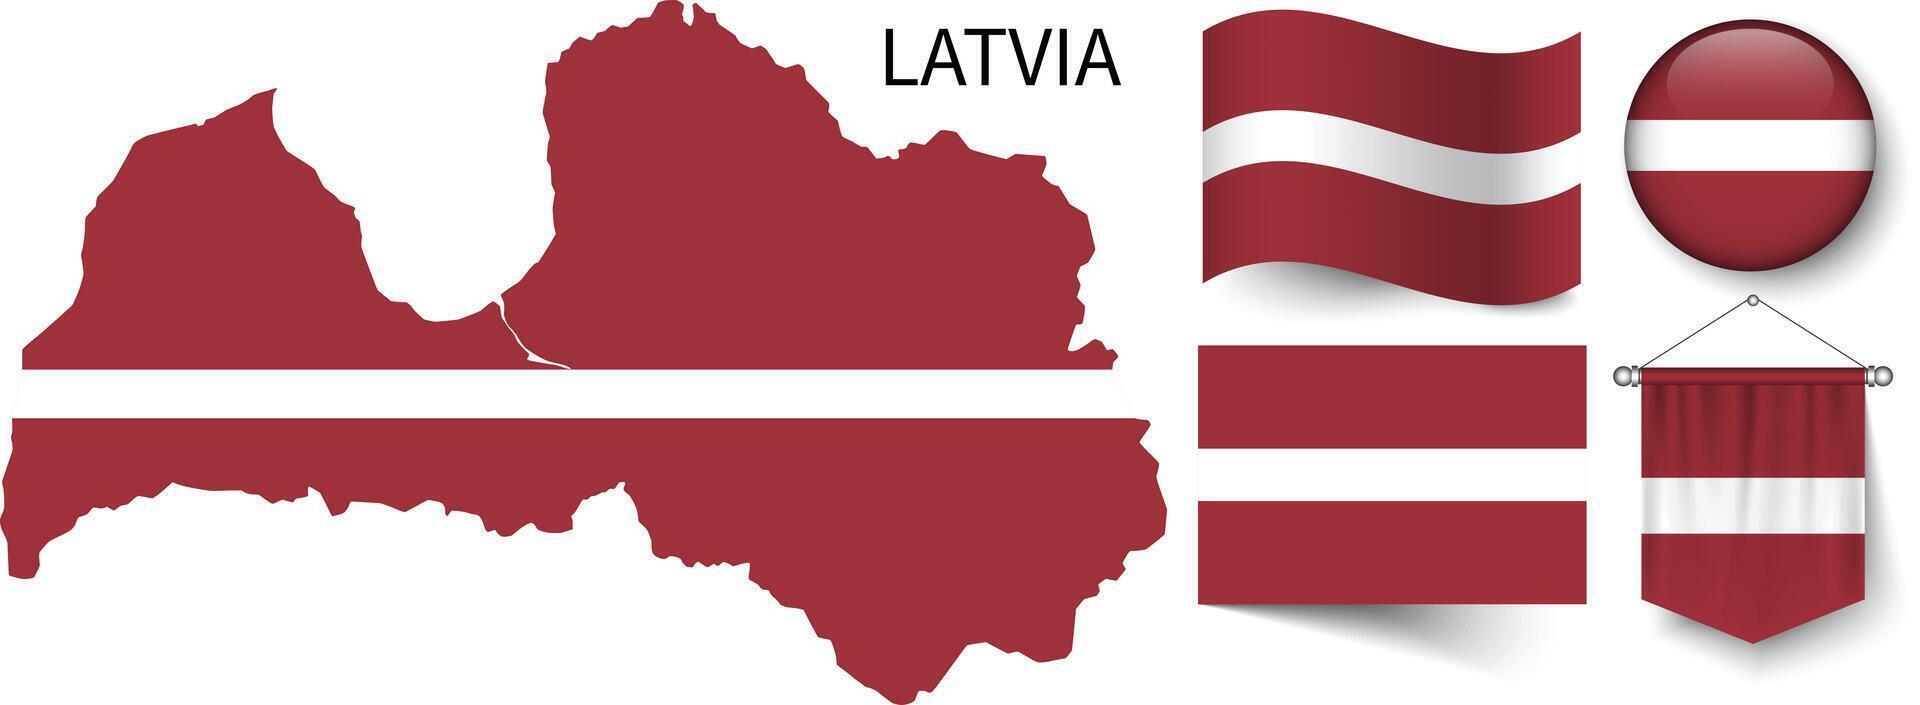 The various patterns of the Latvia national flags and the map of Latvia's borders vector